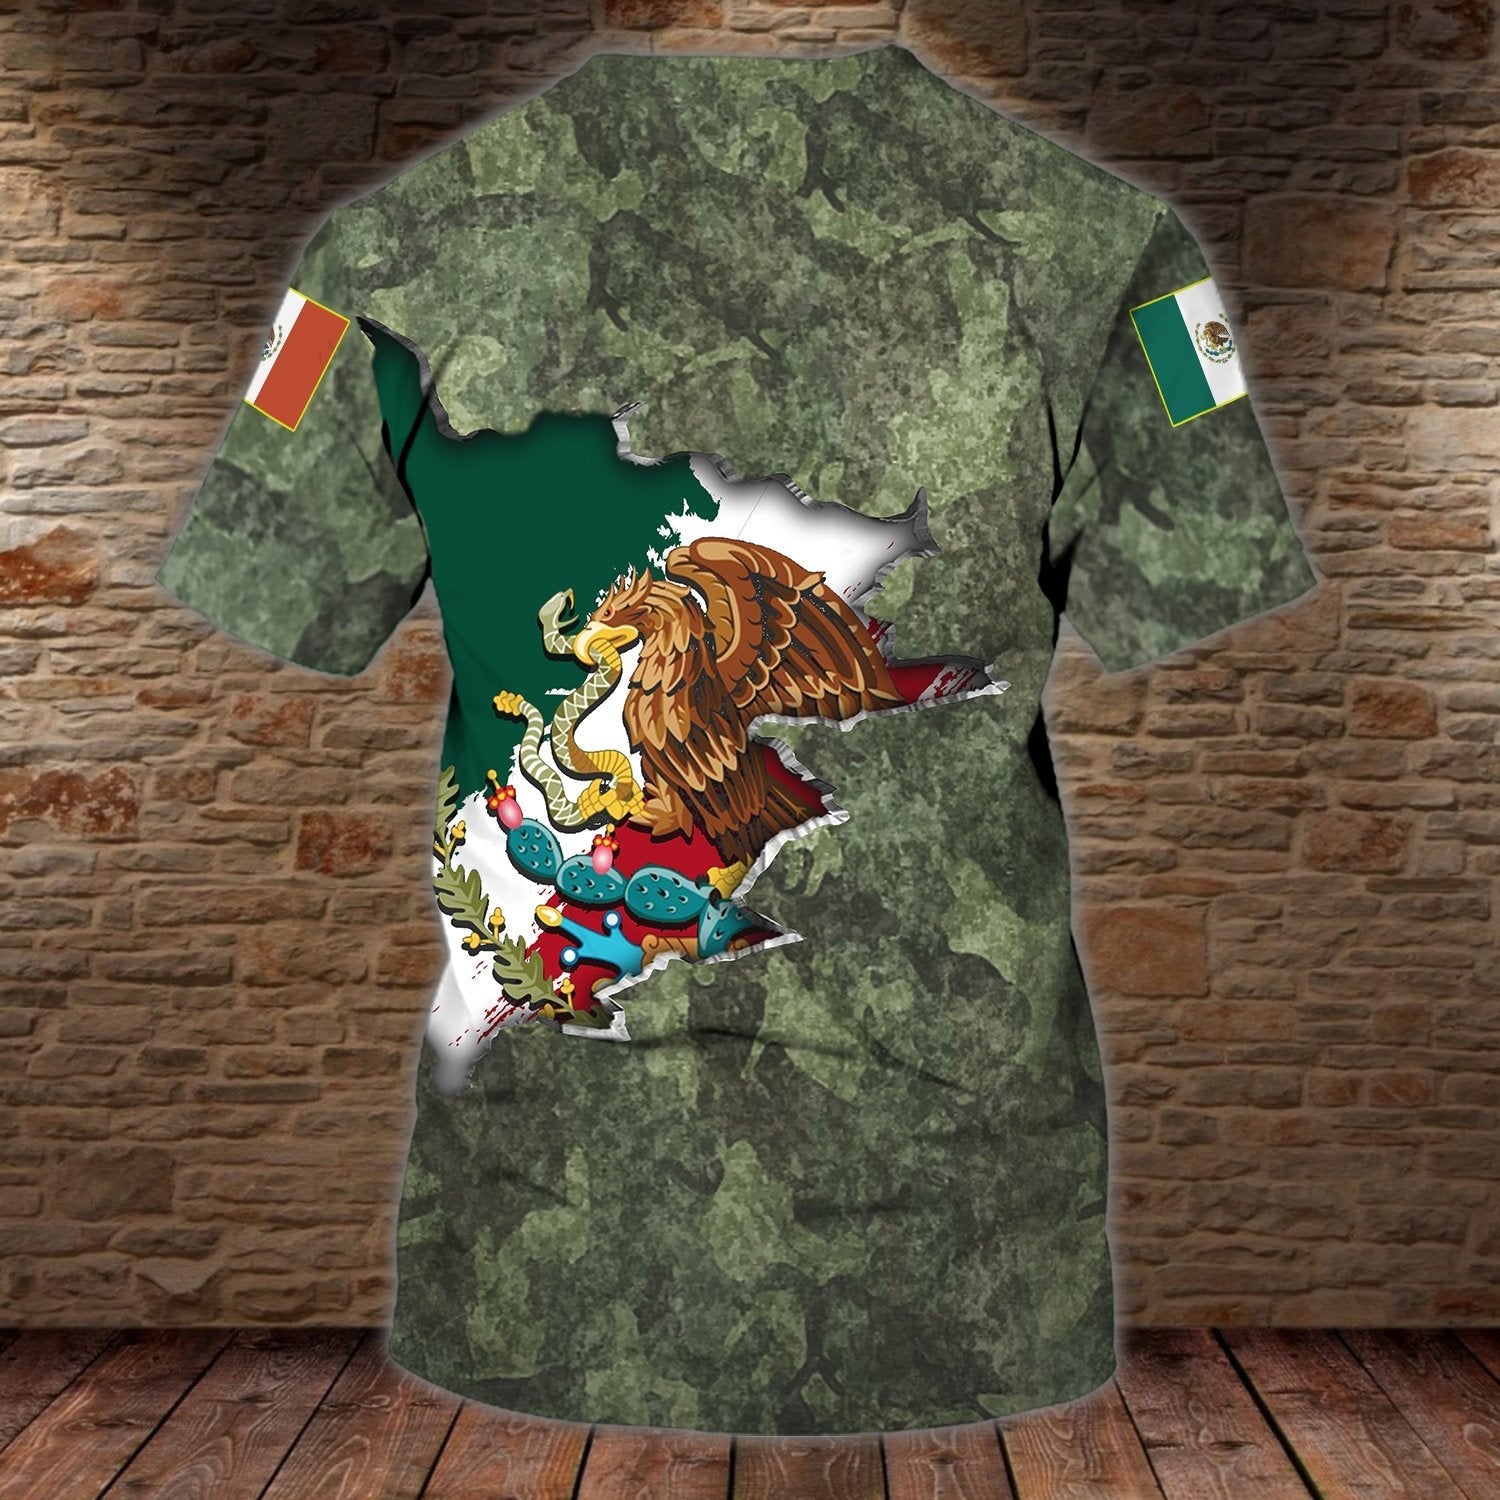 Customized 3D all over printed Mexican Shirt/ Mexico T shirt/ Mexican Shirts for Men and Women